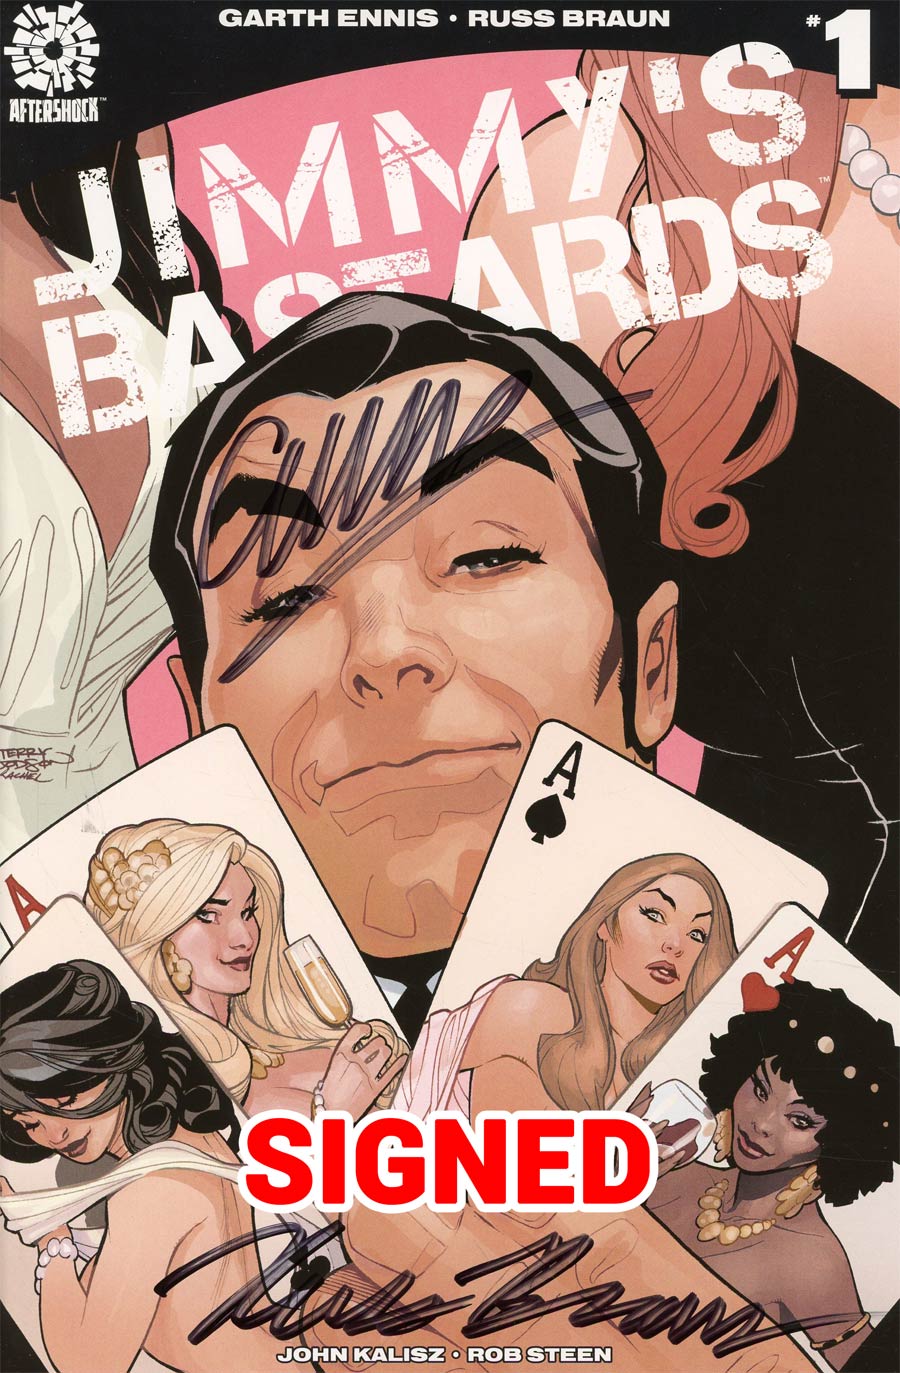 Jimmys Bastards #1 Cover D Midtown Exclusive Terry Dodson Cover Signed By Garth Ennis & Russ Braun